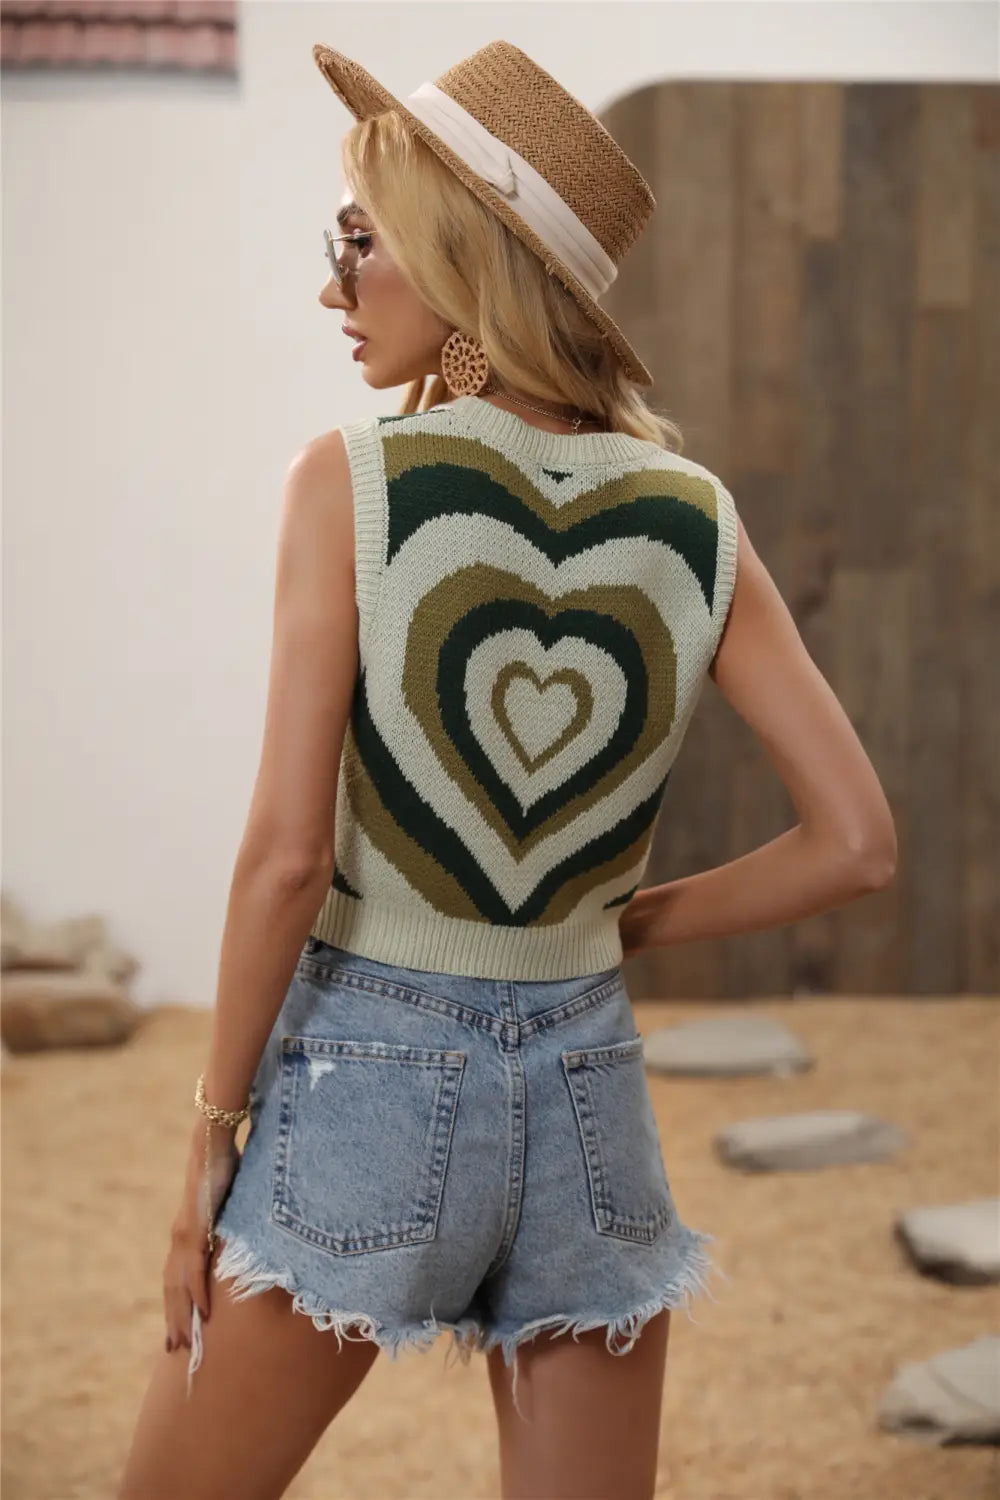 Lovemi - Knitted Tops Women Tank Top Casual Summer